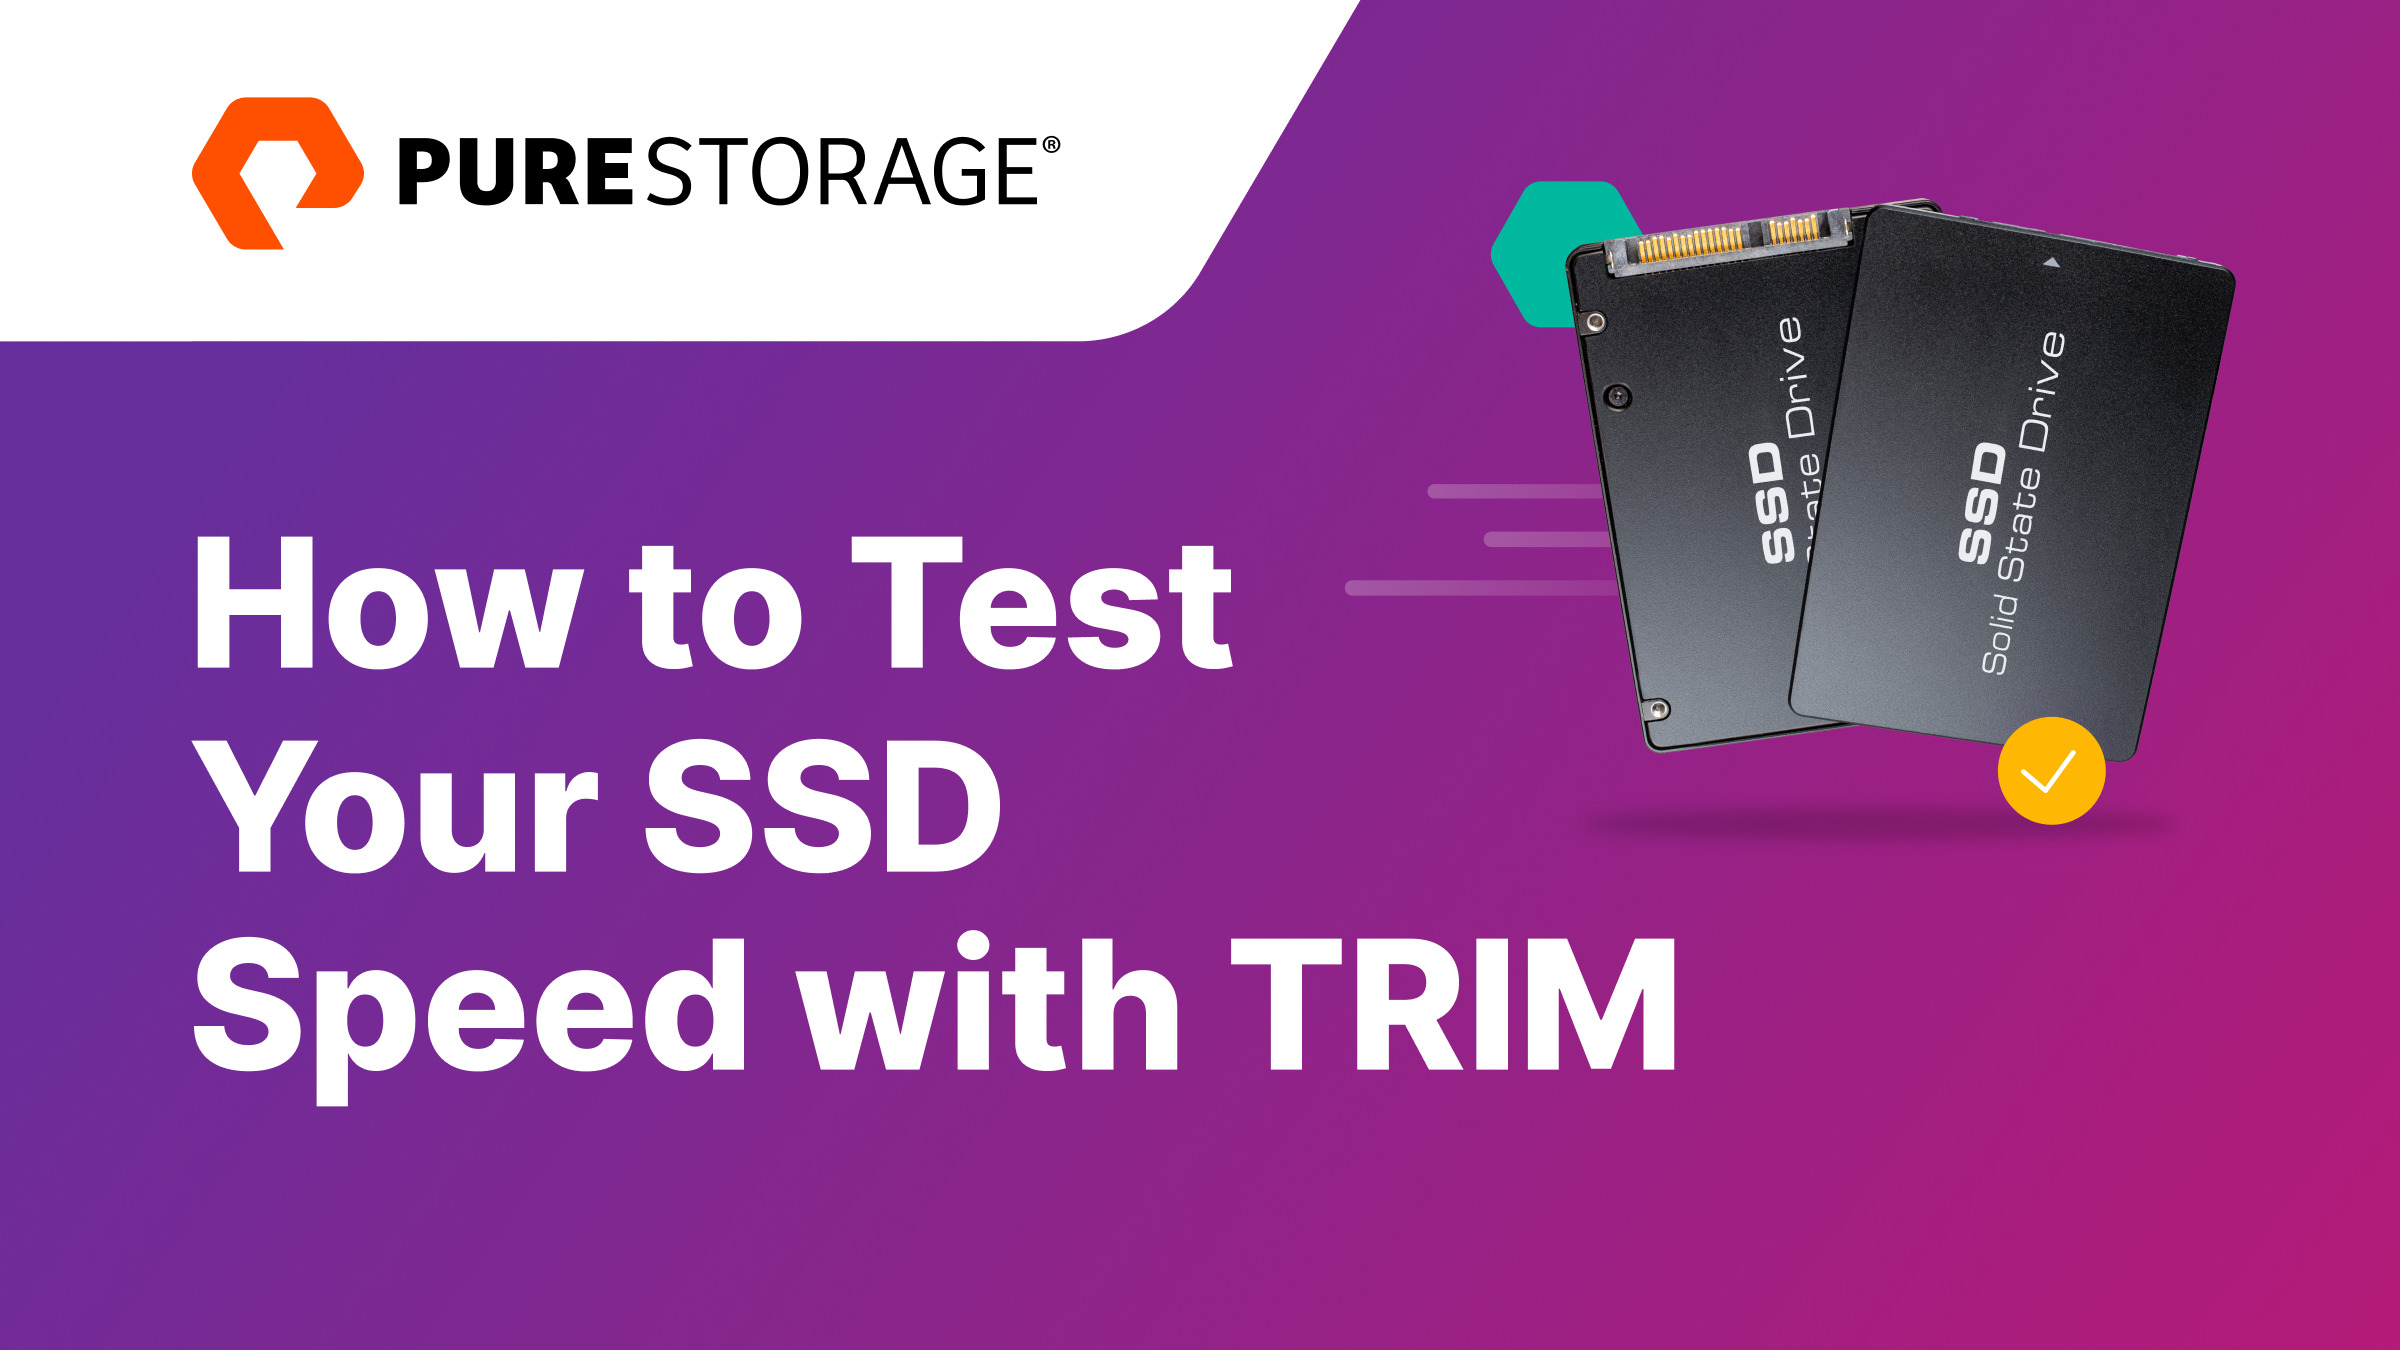 sarkom Dem Fabel How to Test Your SSD Speed with TRIM | Pure Storage Blog